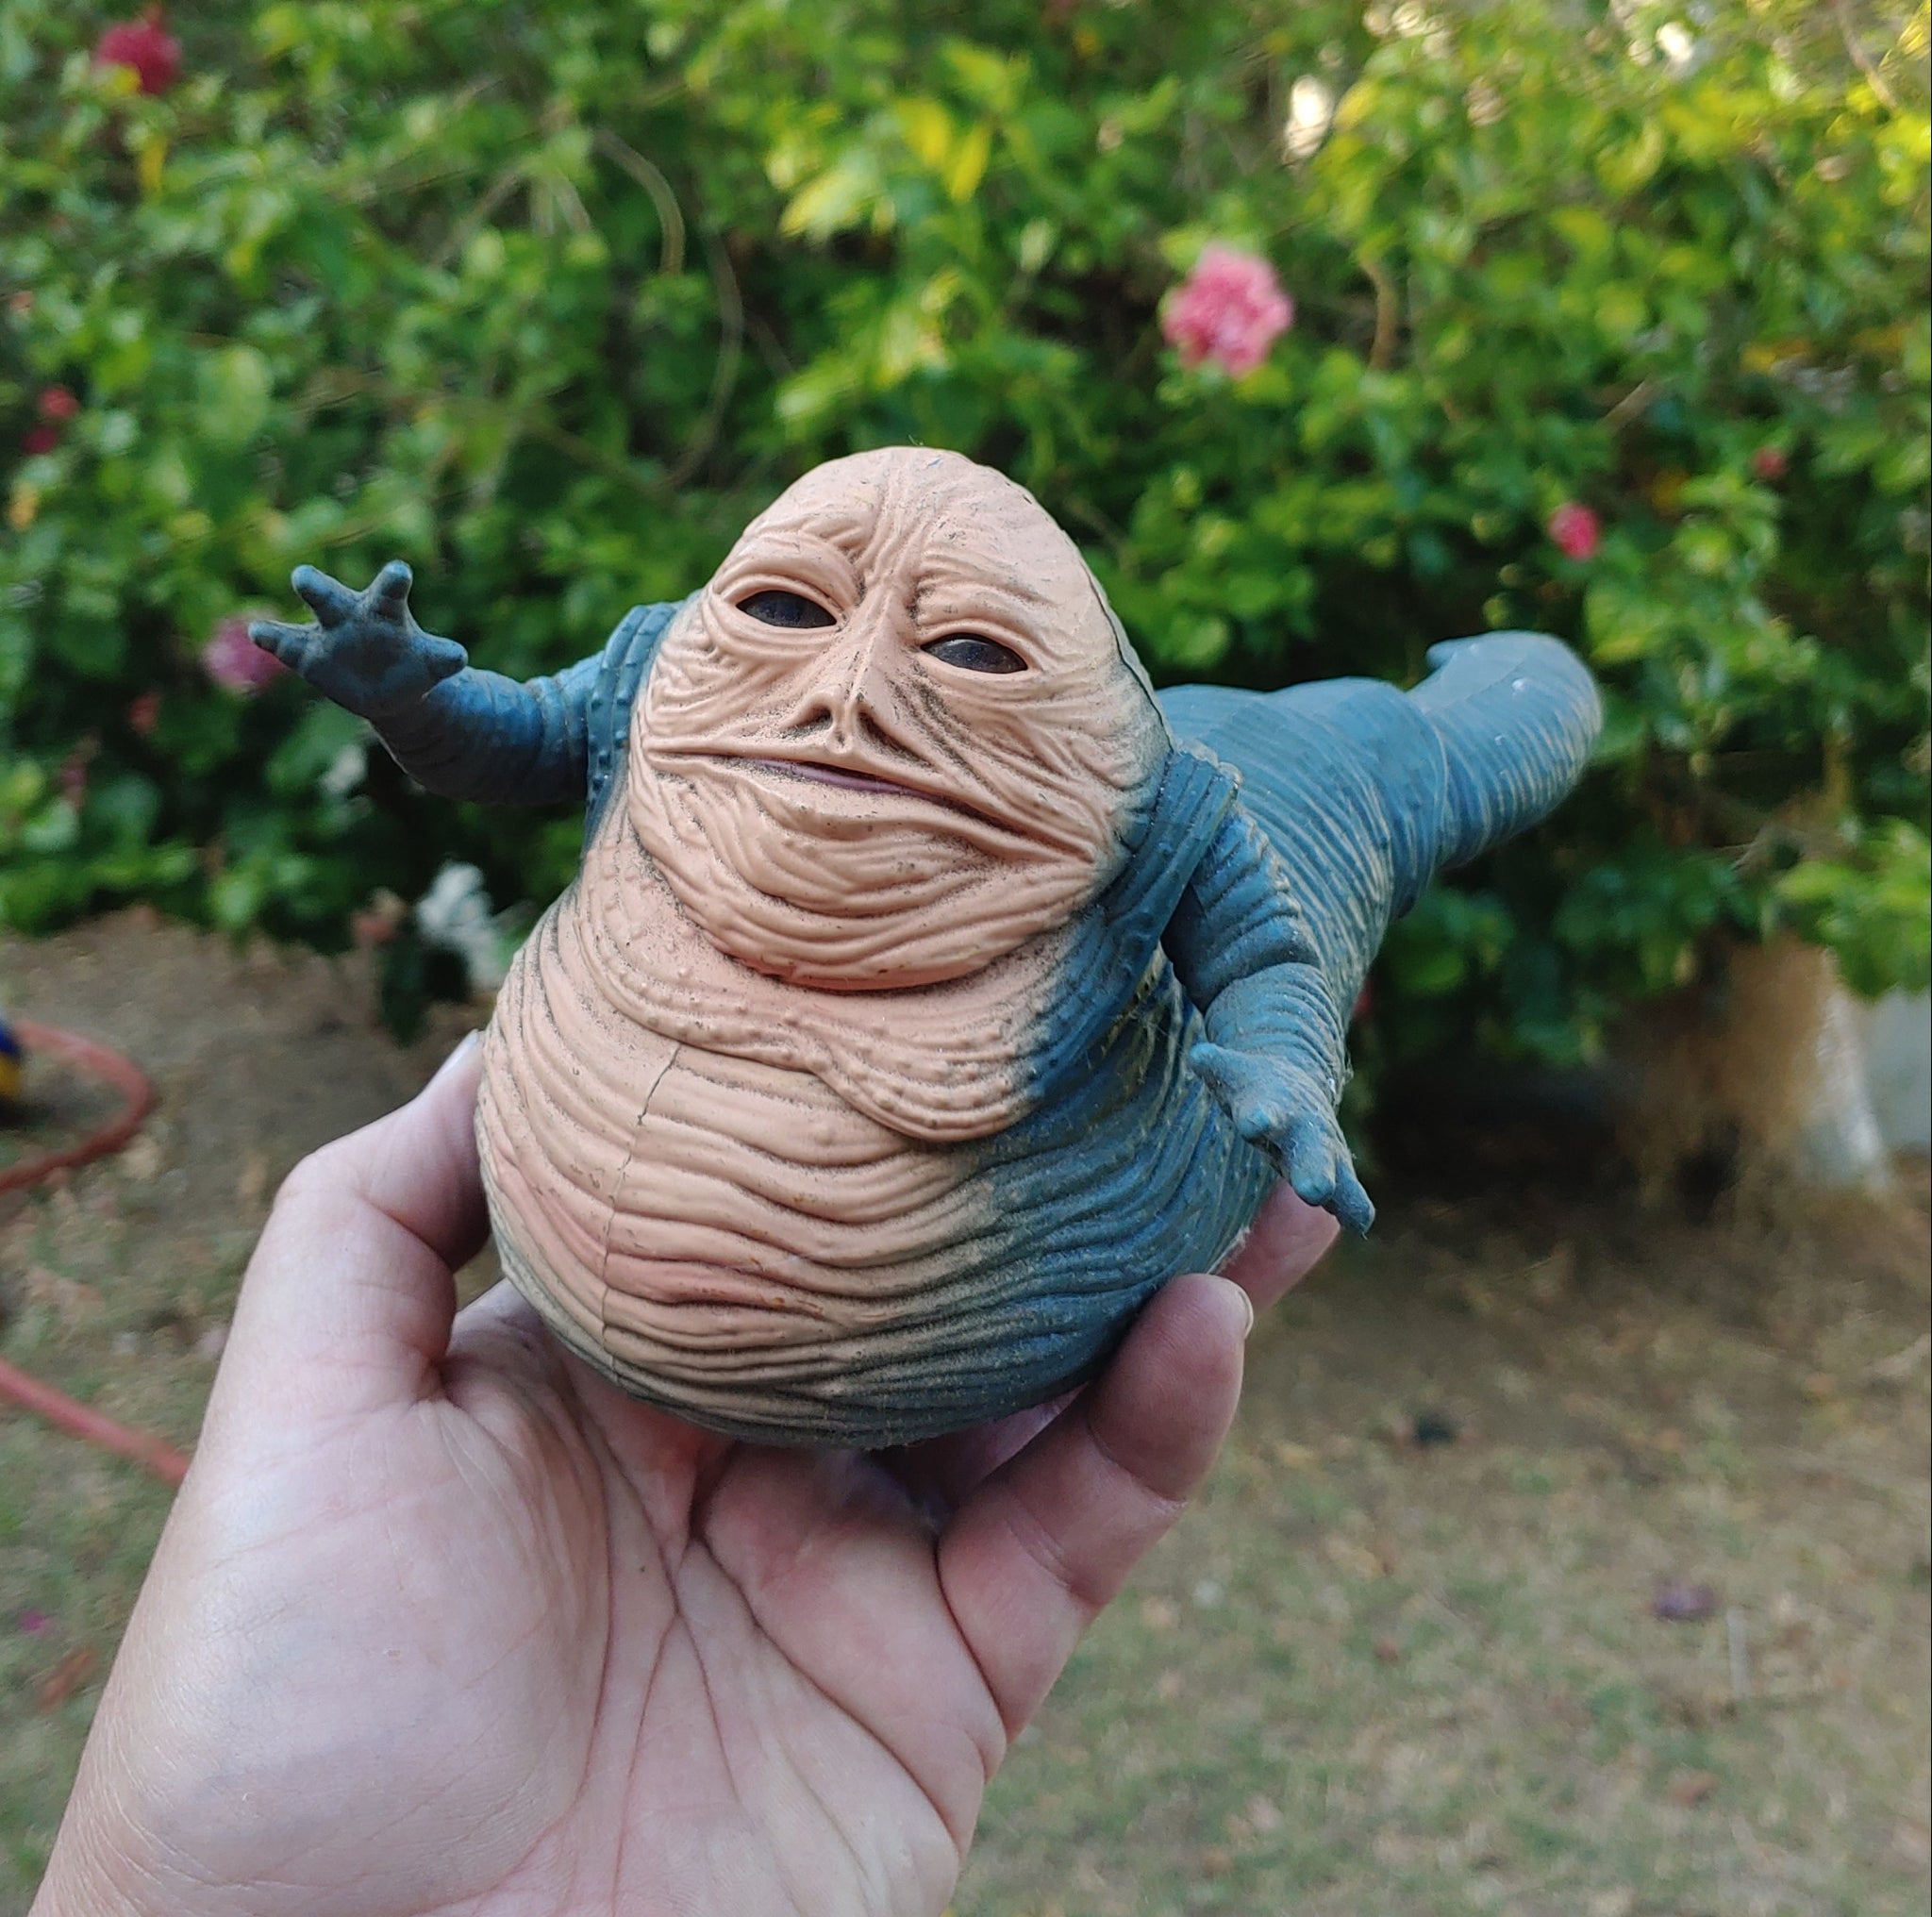 Star Wars Jabba the Turd Action Figure!